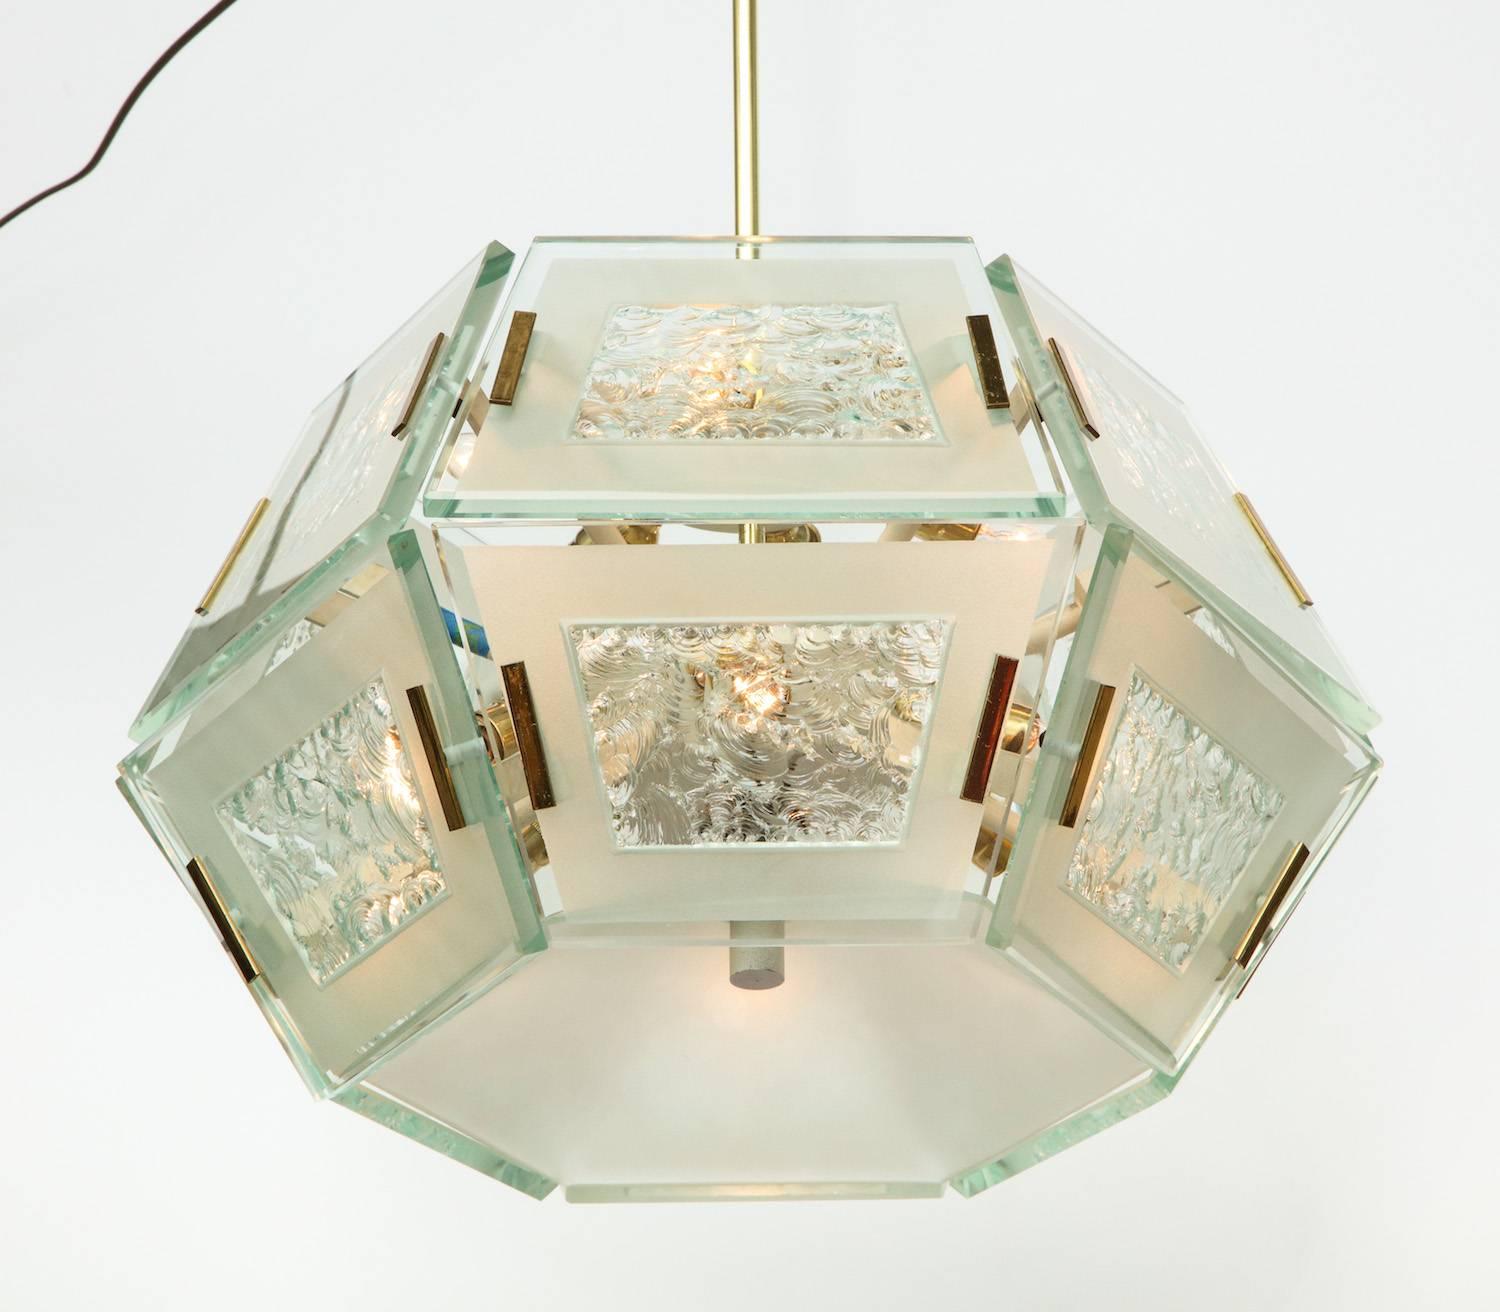 Rare hanging light no. 2362, rare hanging light by Max Ingrand for Fontana Arte. Hexagonal form comprised of thick, hand-cut glass tiles with acid-etched faces and chipped centres. Twelve candelabra sockets, white-painted metal interior and polished